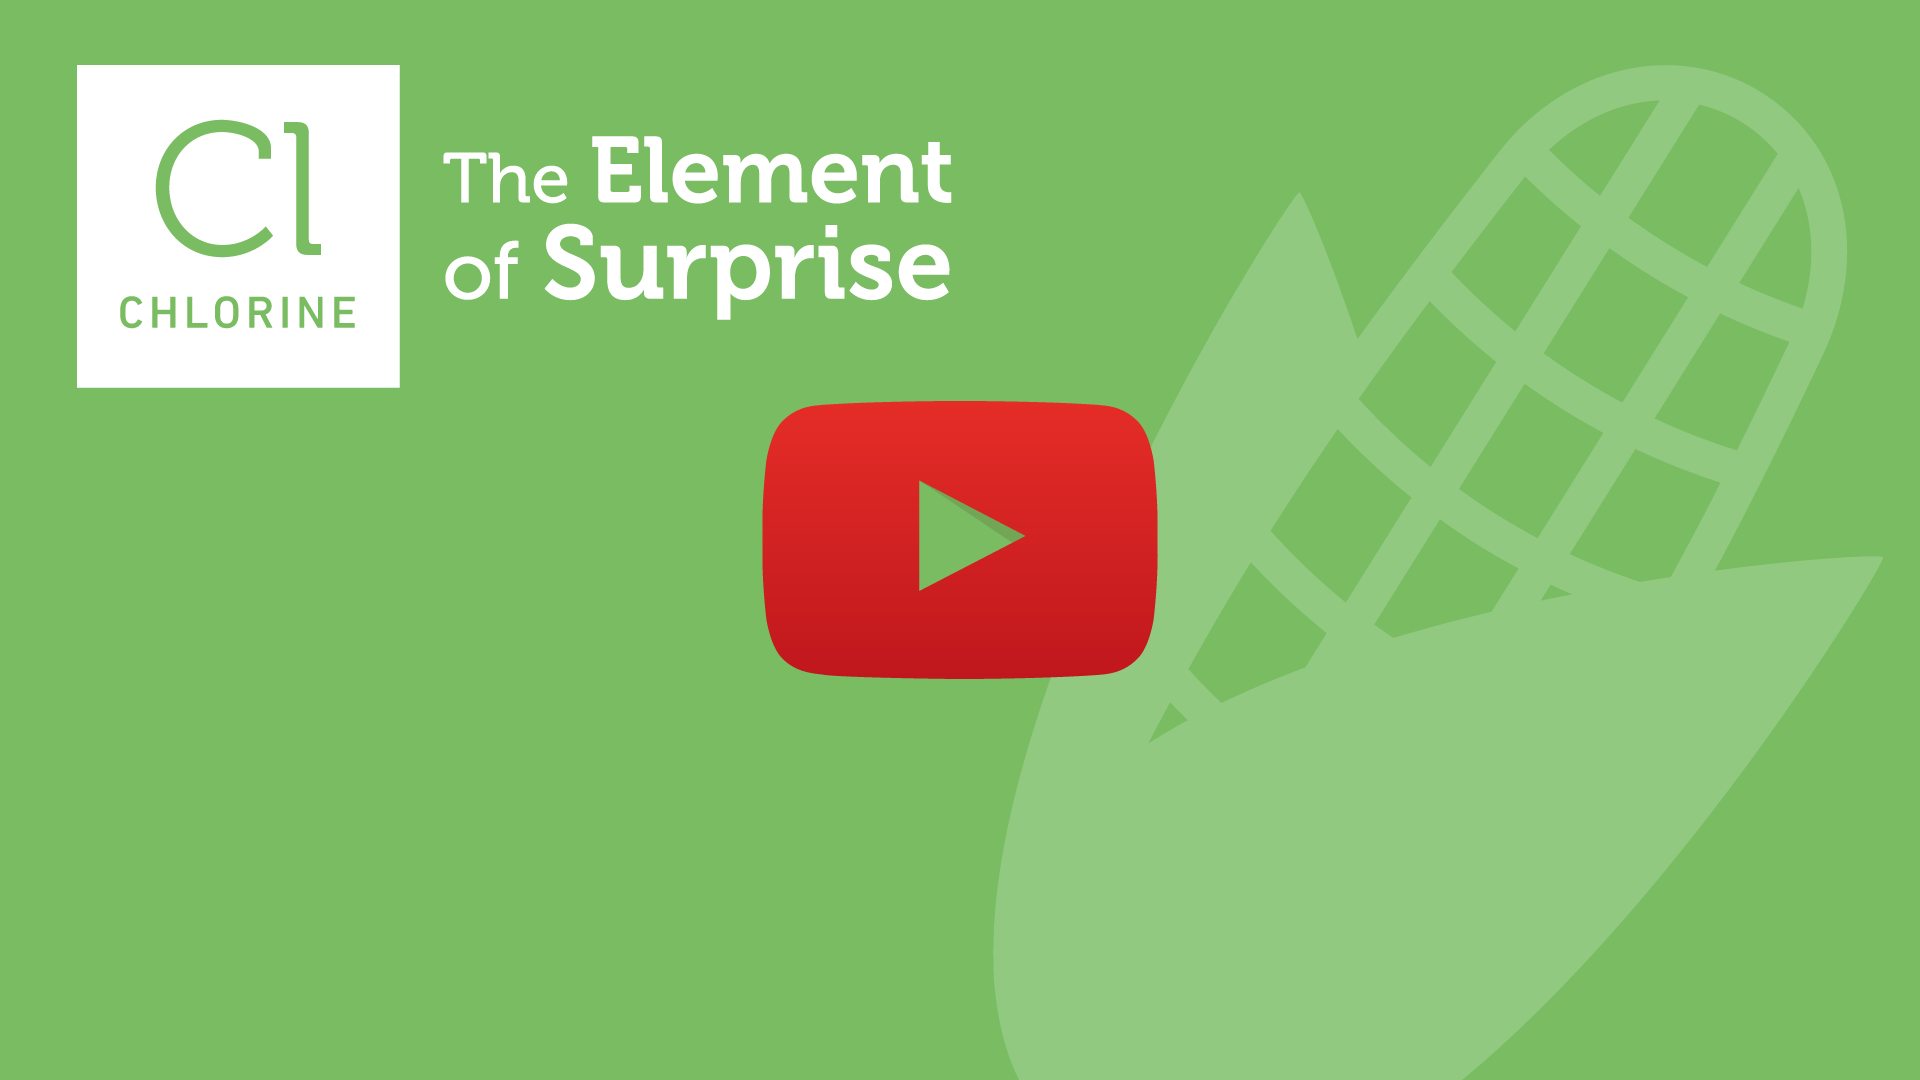 The Element of Surprise